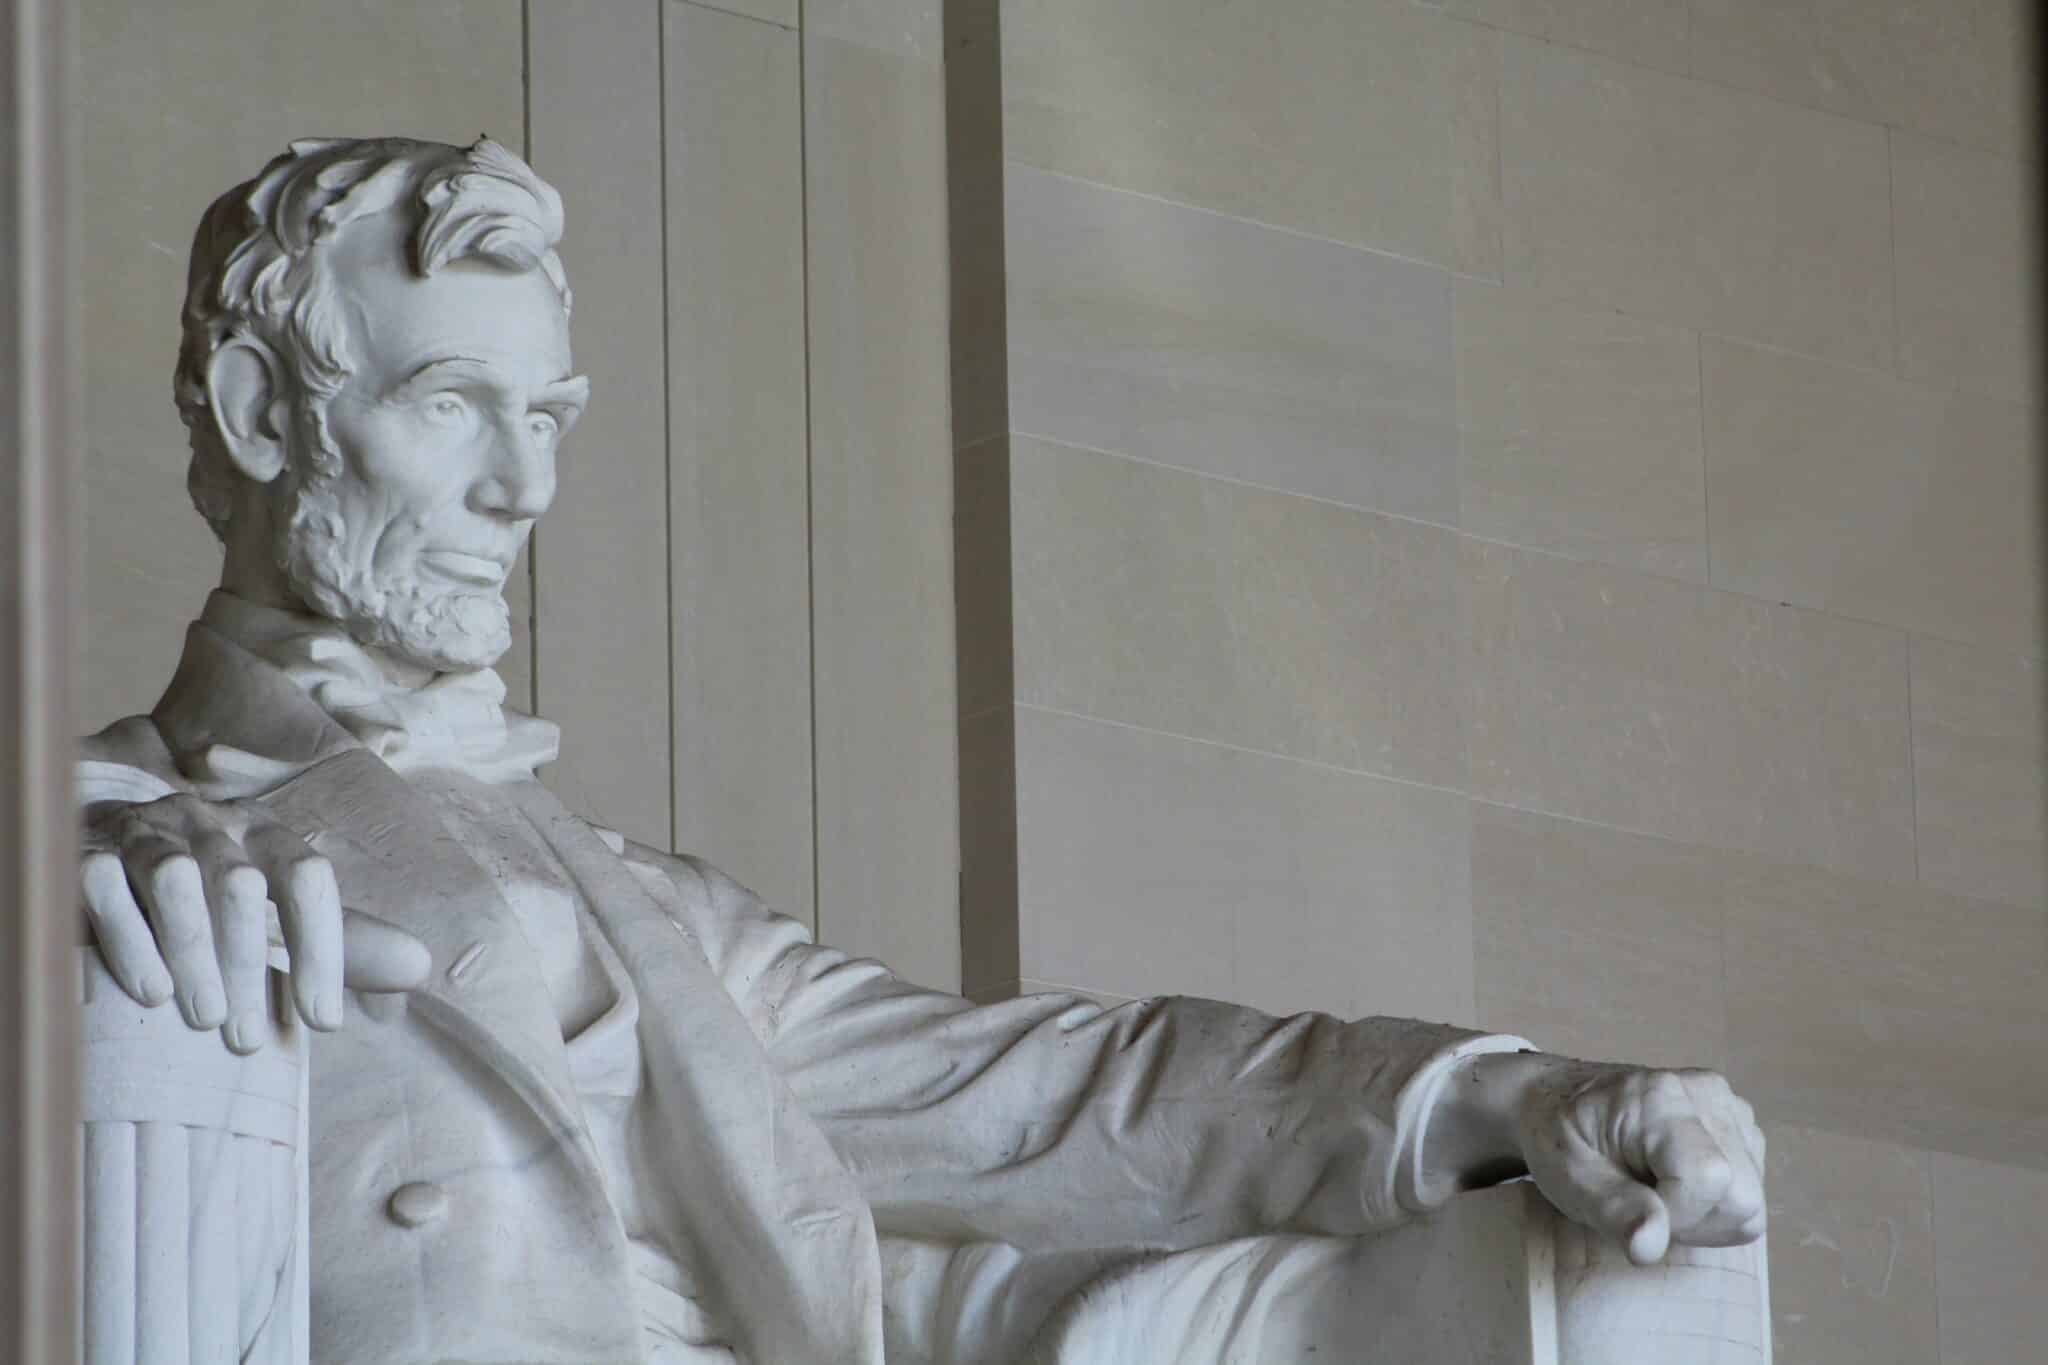 Statue of President Abraham Lincoln | Photo by Ed Fr on Unsplash